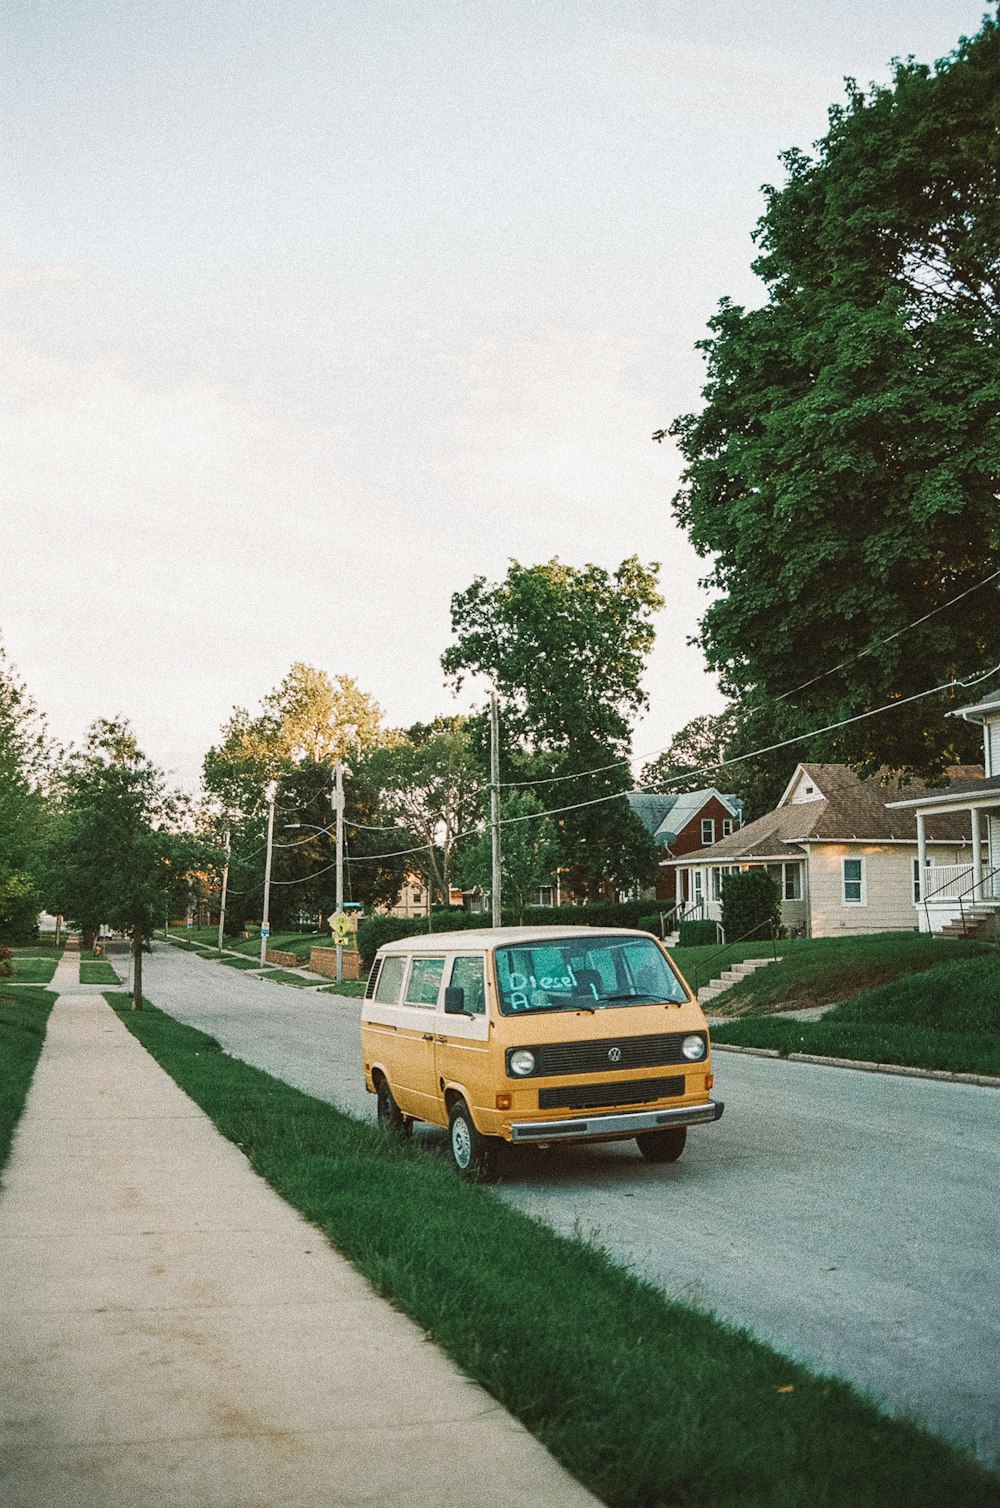 yellow van parked on green grass field near houses and trees during daytime